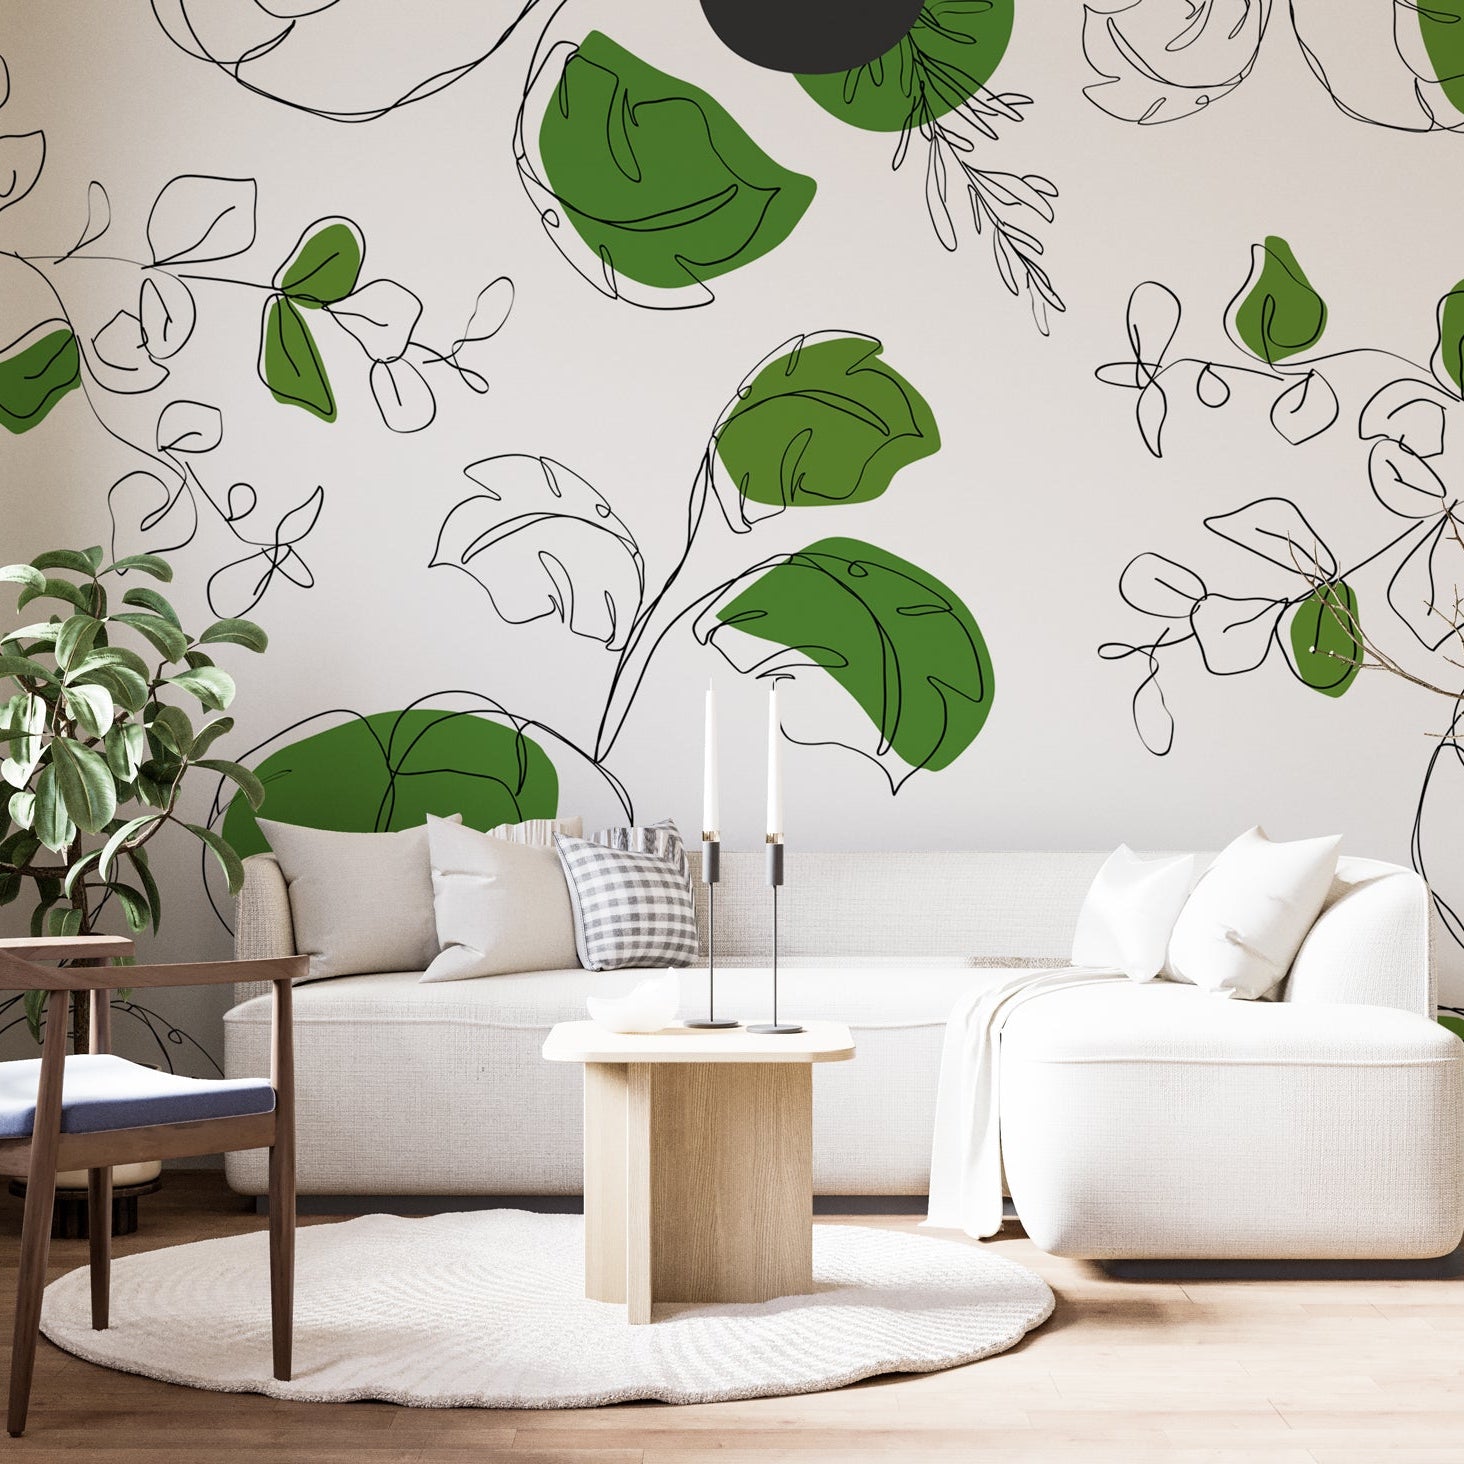 Green Leaf Wallpaper Mural Transform Your Room with Style